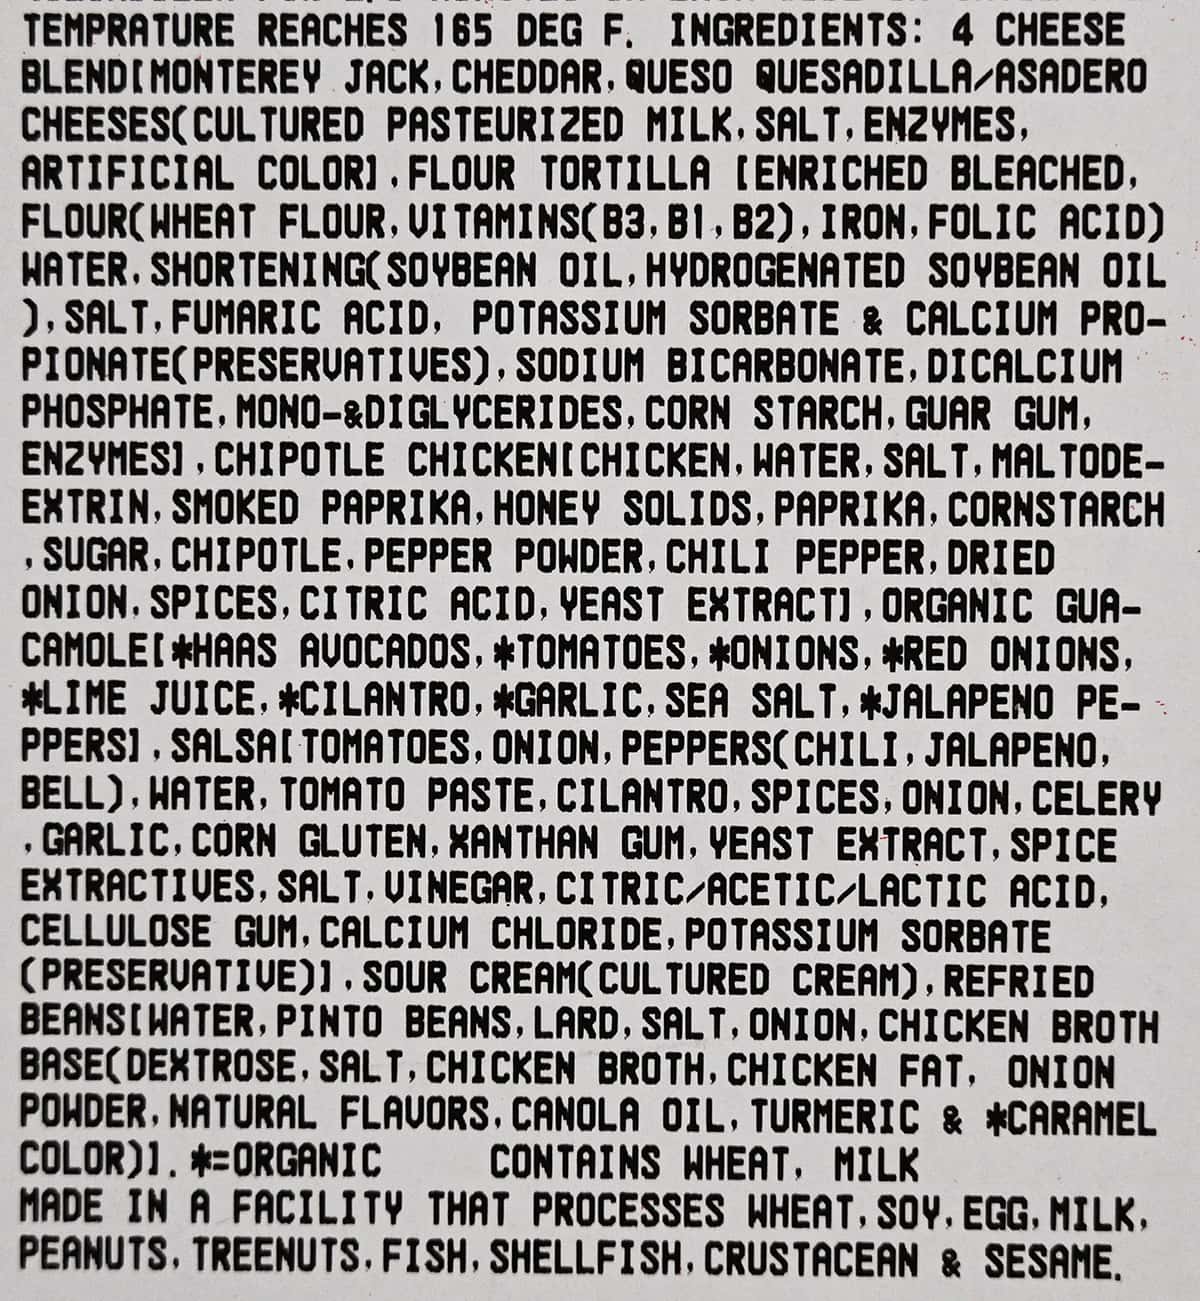 Closrup image of the ingredients and cooking instructions from the front label.